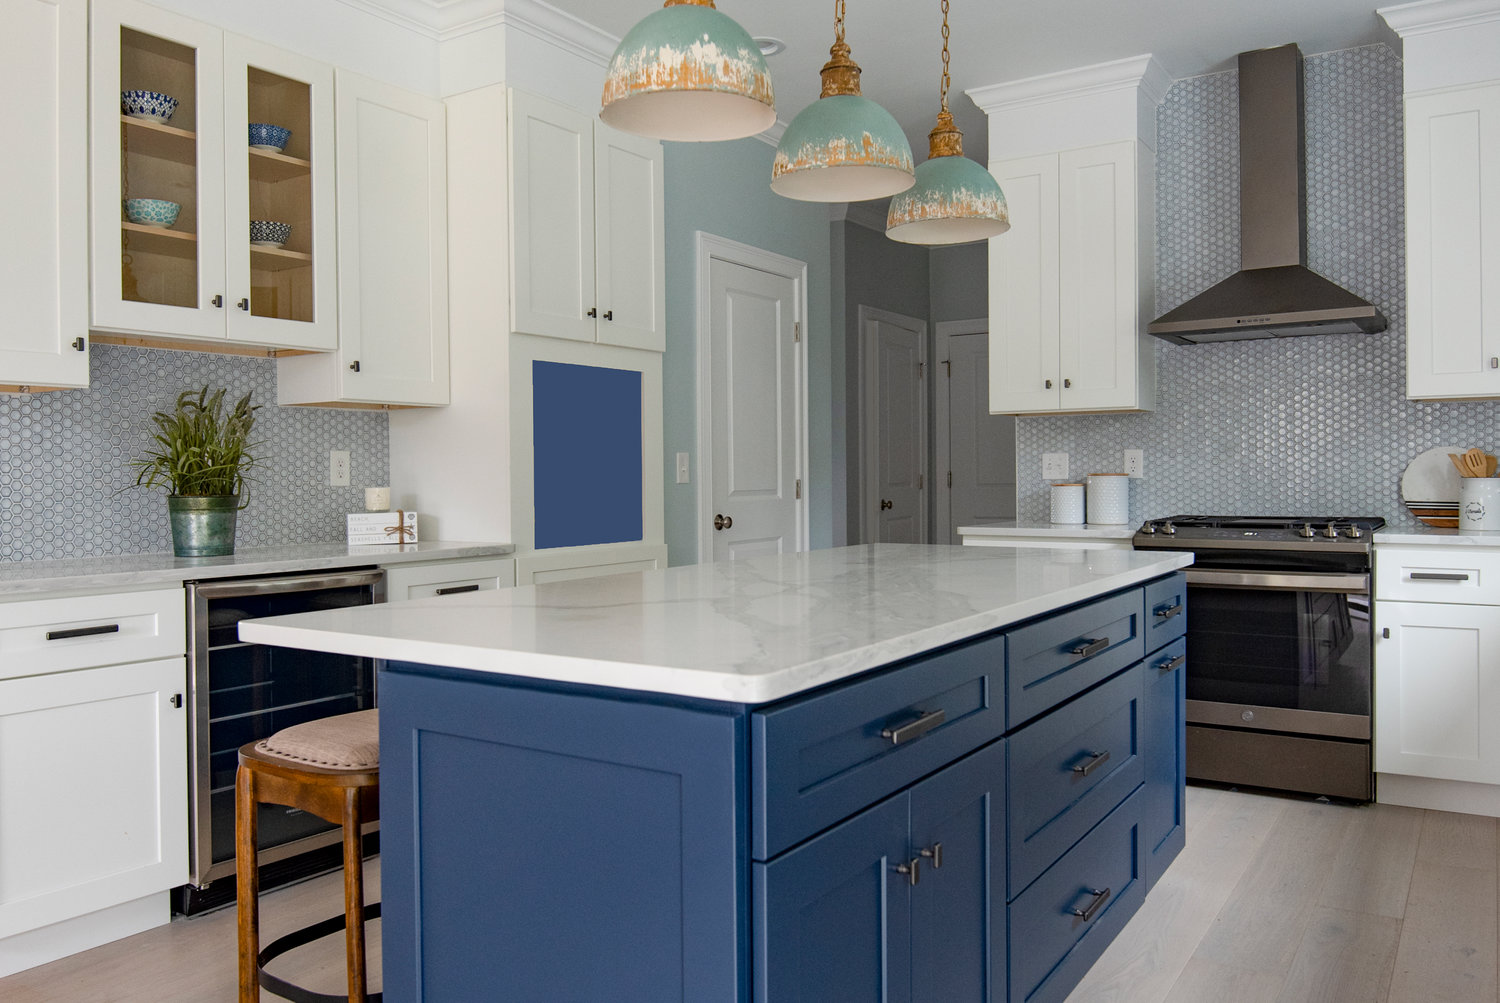 A range of blues adds unexpected panache in the kitchen